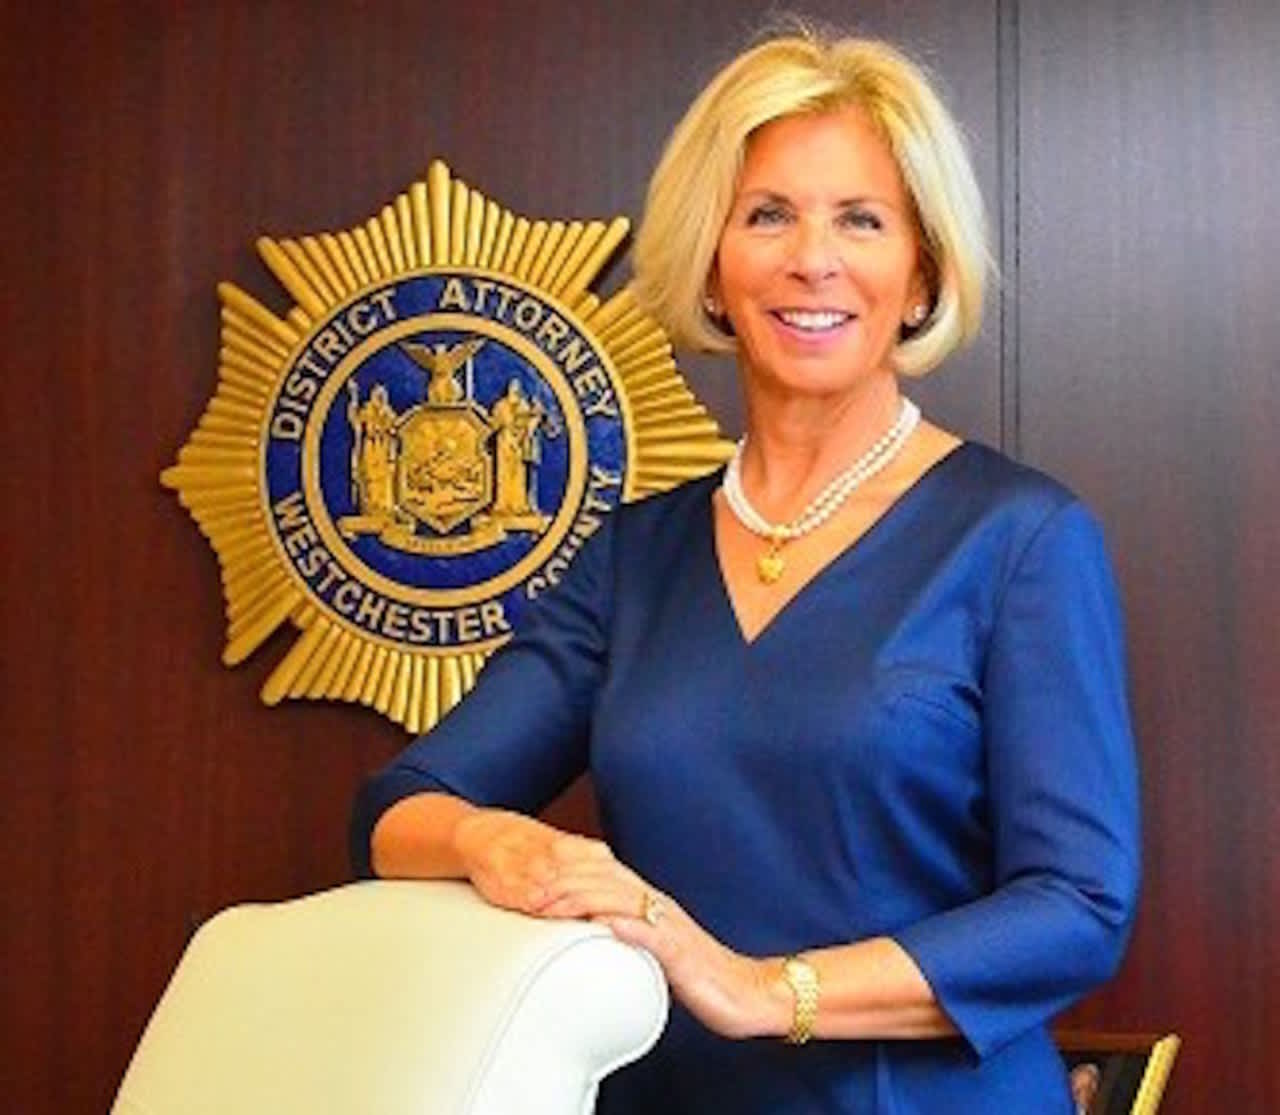 Westchester County District Attorney Janet DiFiore is issuing a community alert to notify senior citizens to be cautious when it comes to hiring caregivers.